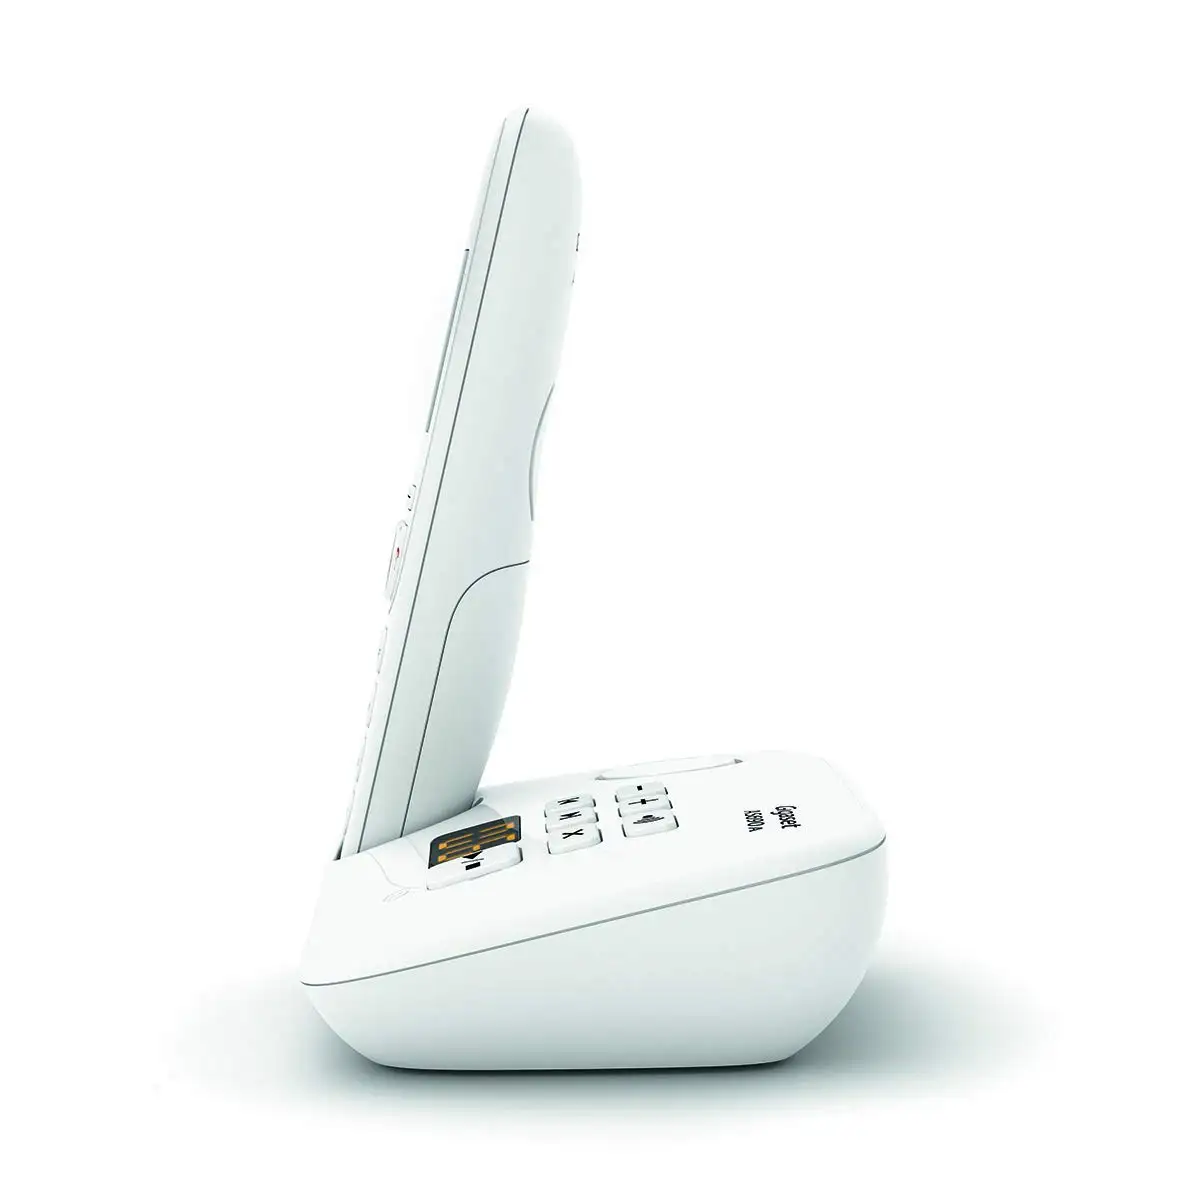 TELEPHONE FIXE GIGASET AS690A DUO SANS FIL